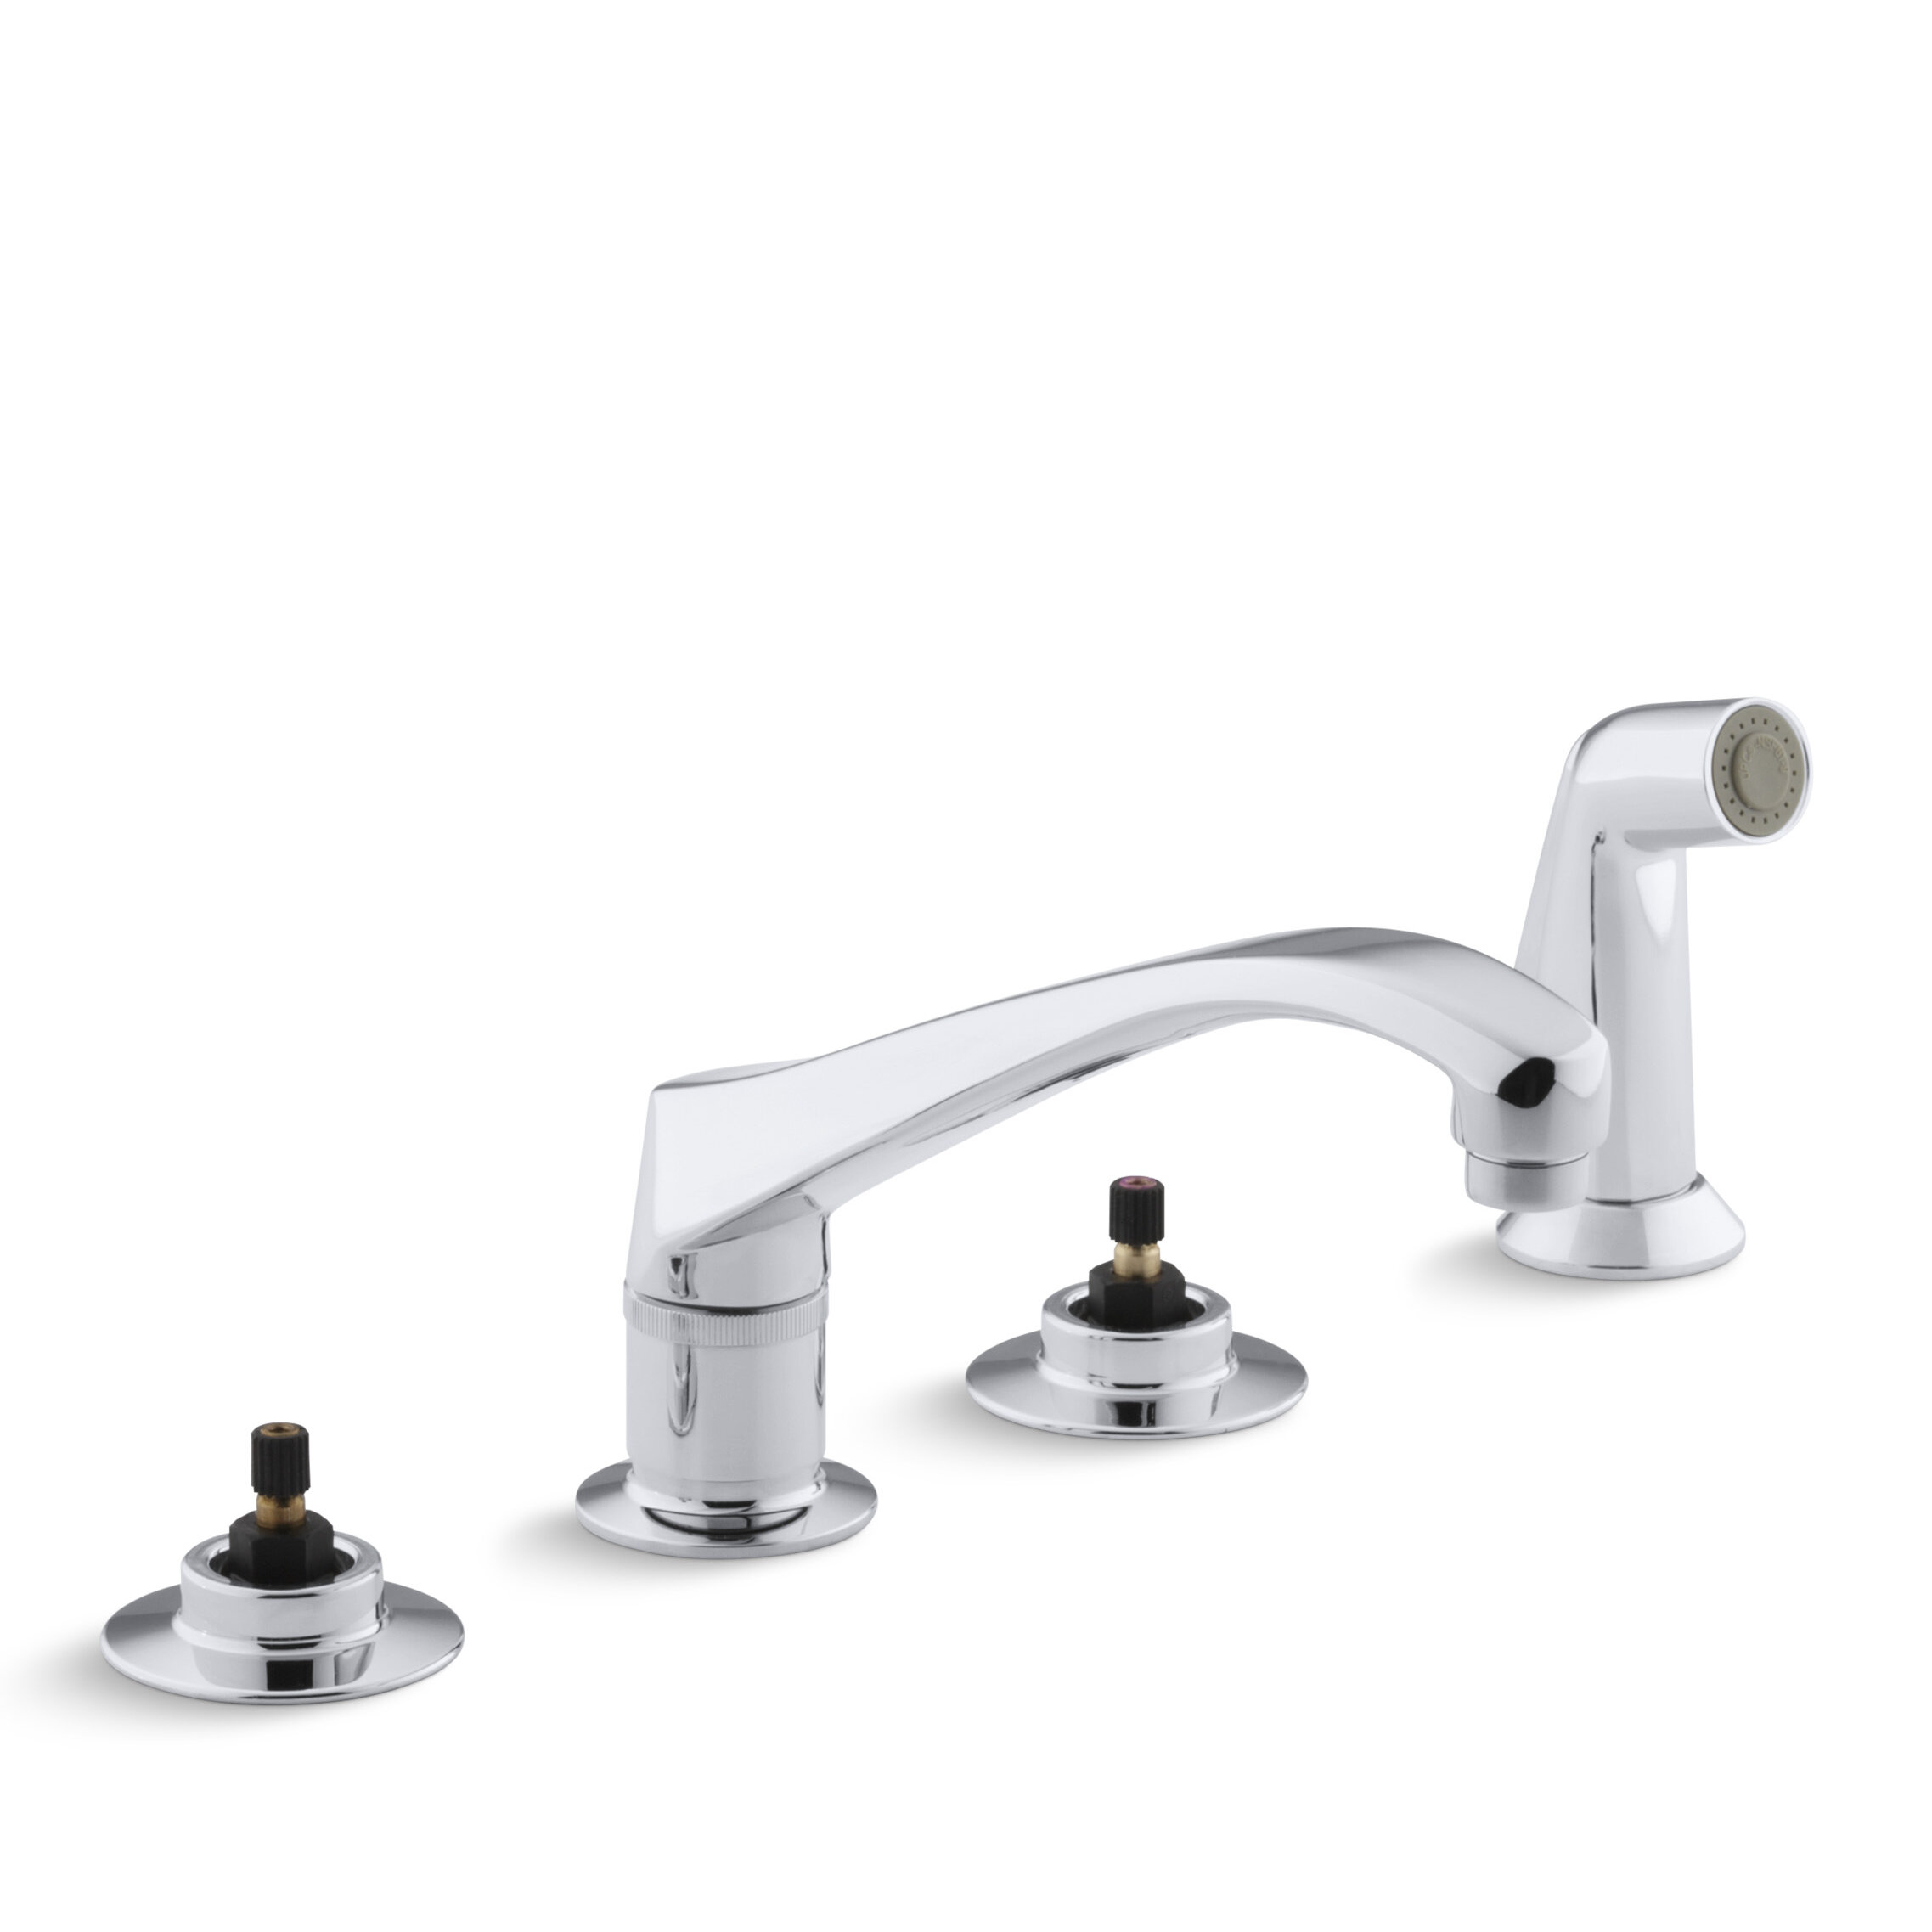 Triton 4 Hole Widespread Kitchen Sink Faucet With 8 1 8 Spout And Matching Finish Sidespray Requires Handles